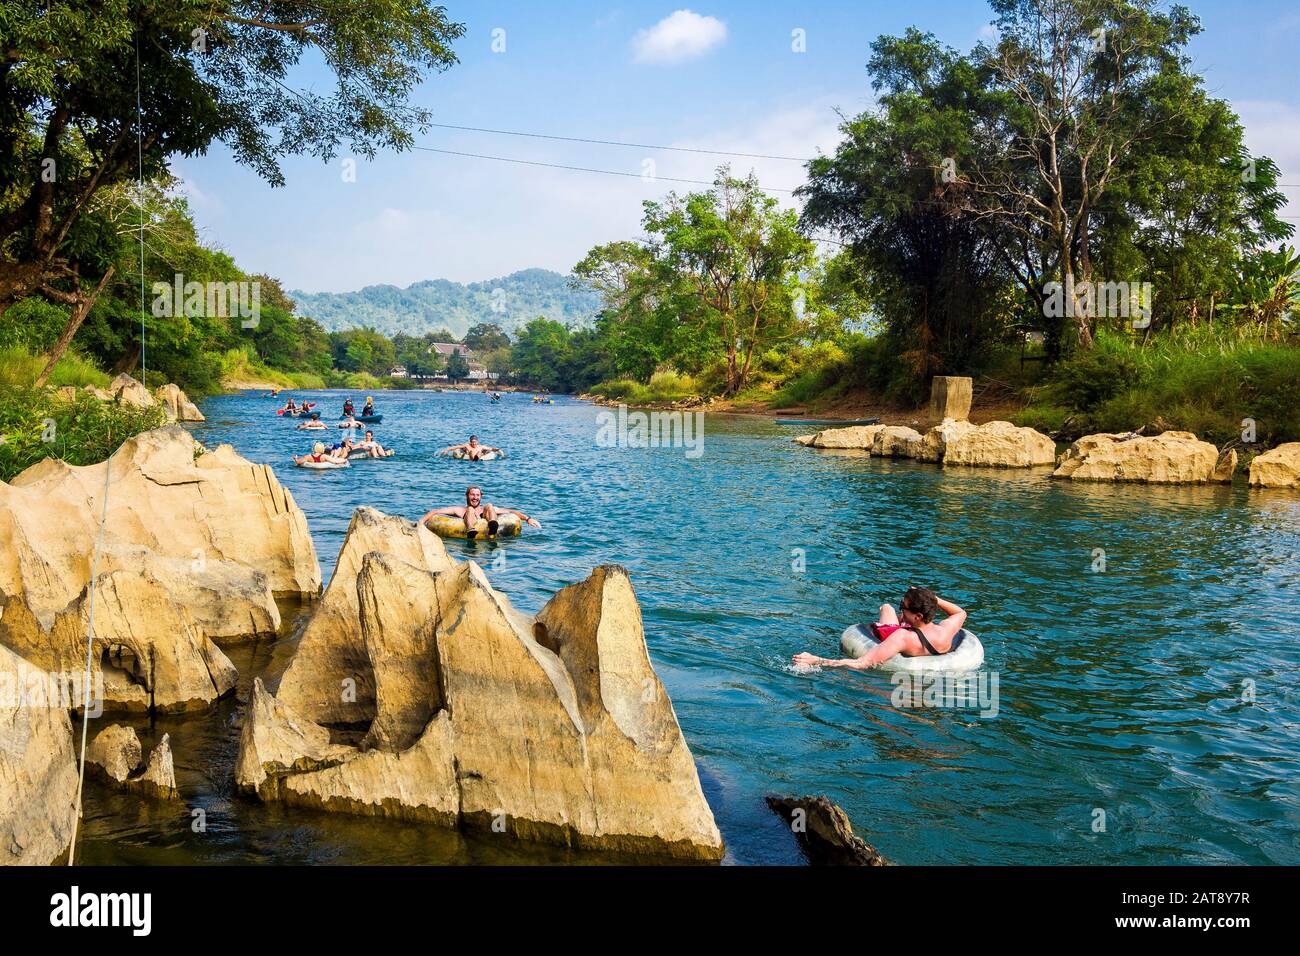 Tourists tubing down the Song River at Vang Vieng, Vientiane Province, Laos. Stock Photo